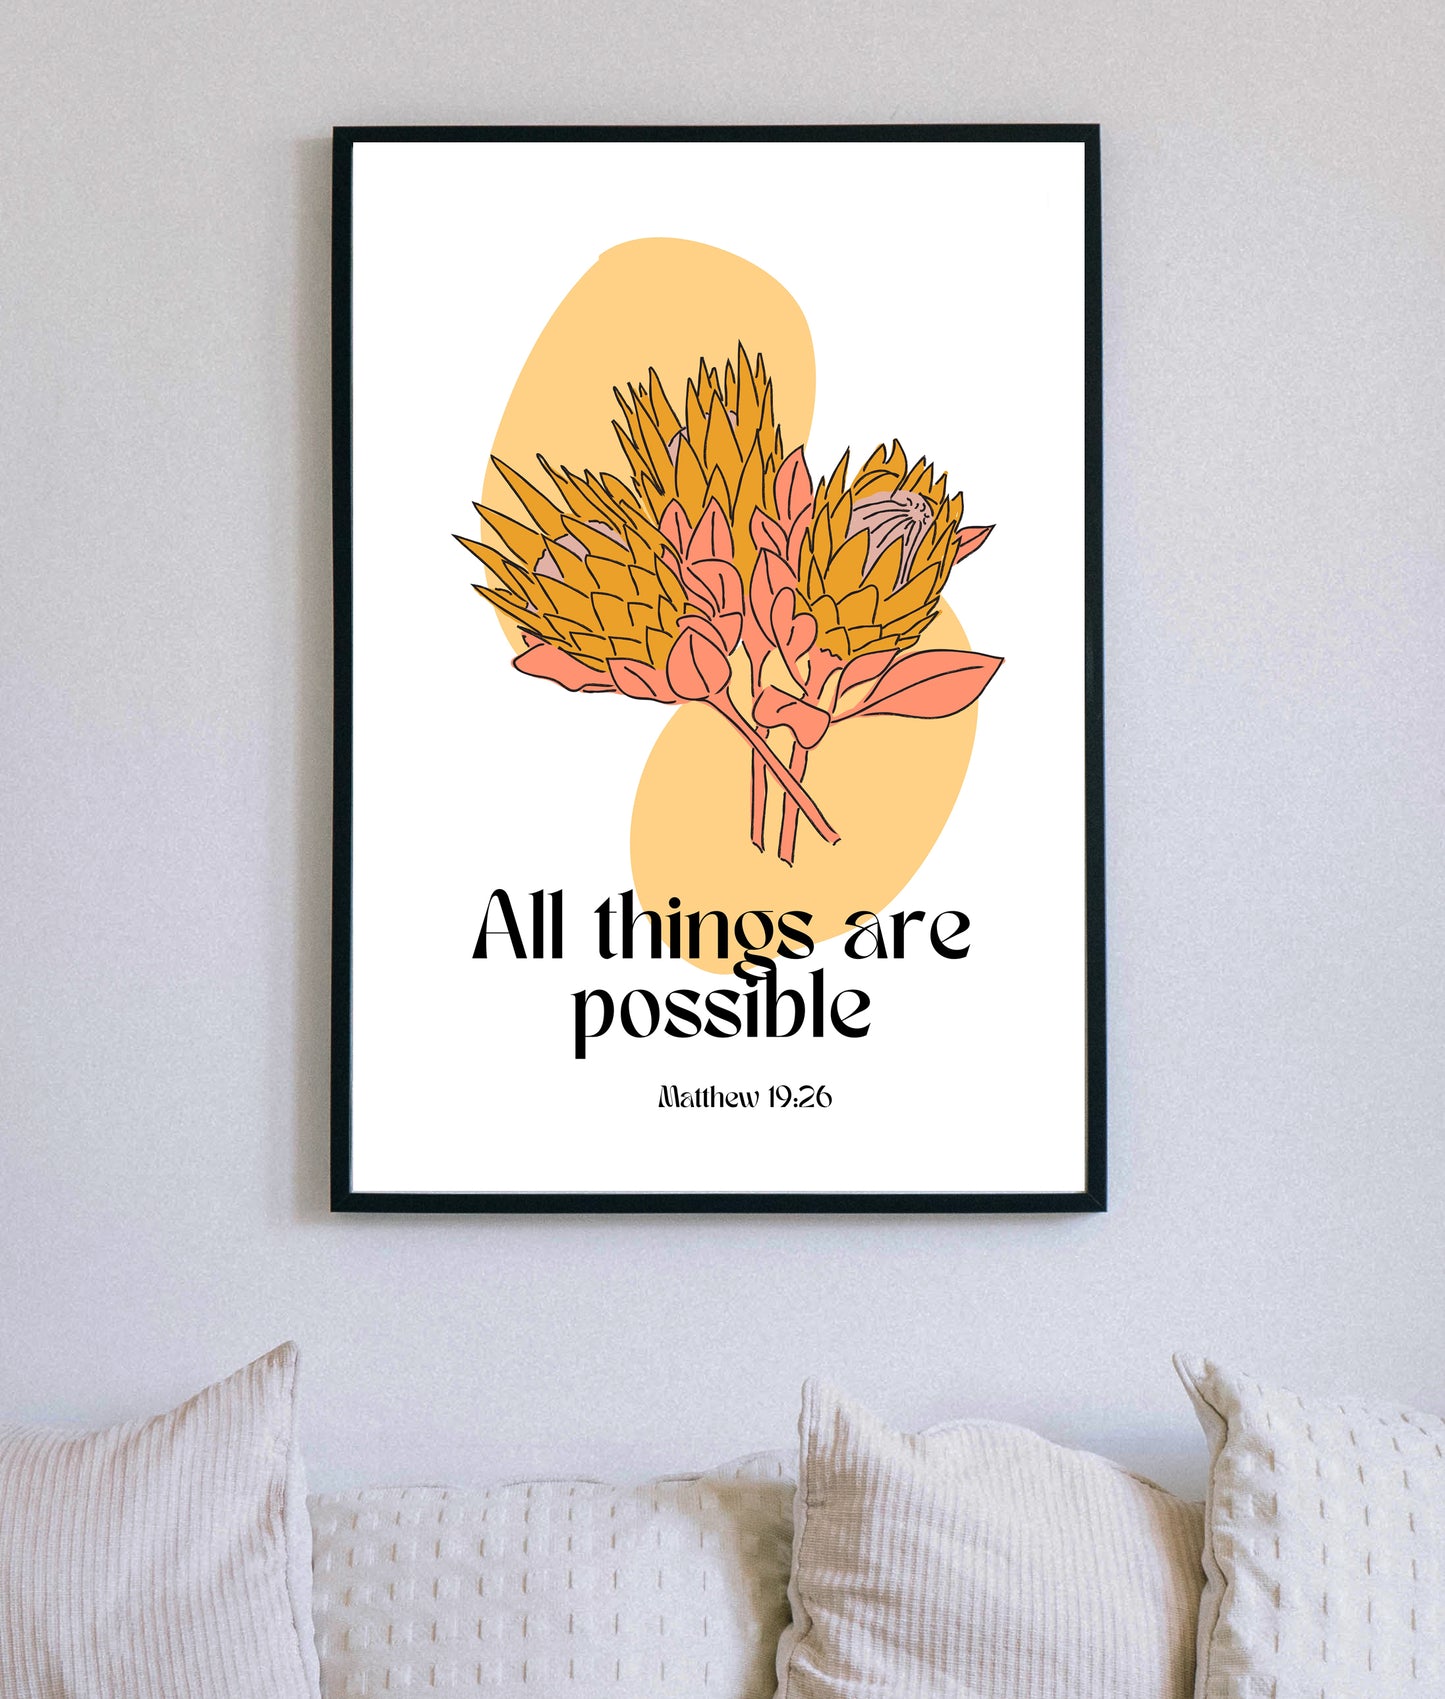 All things are possible Christian Quote, Scripture, Bible Verse Poster Wall Art